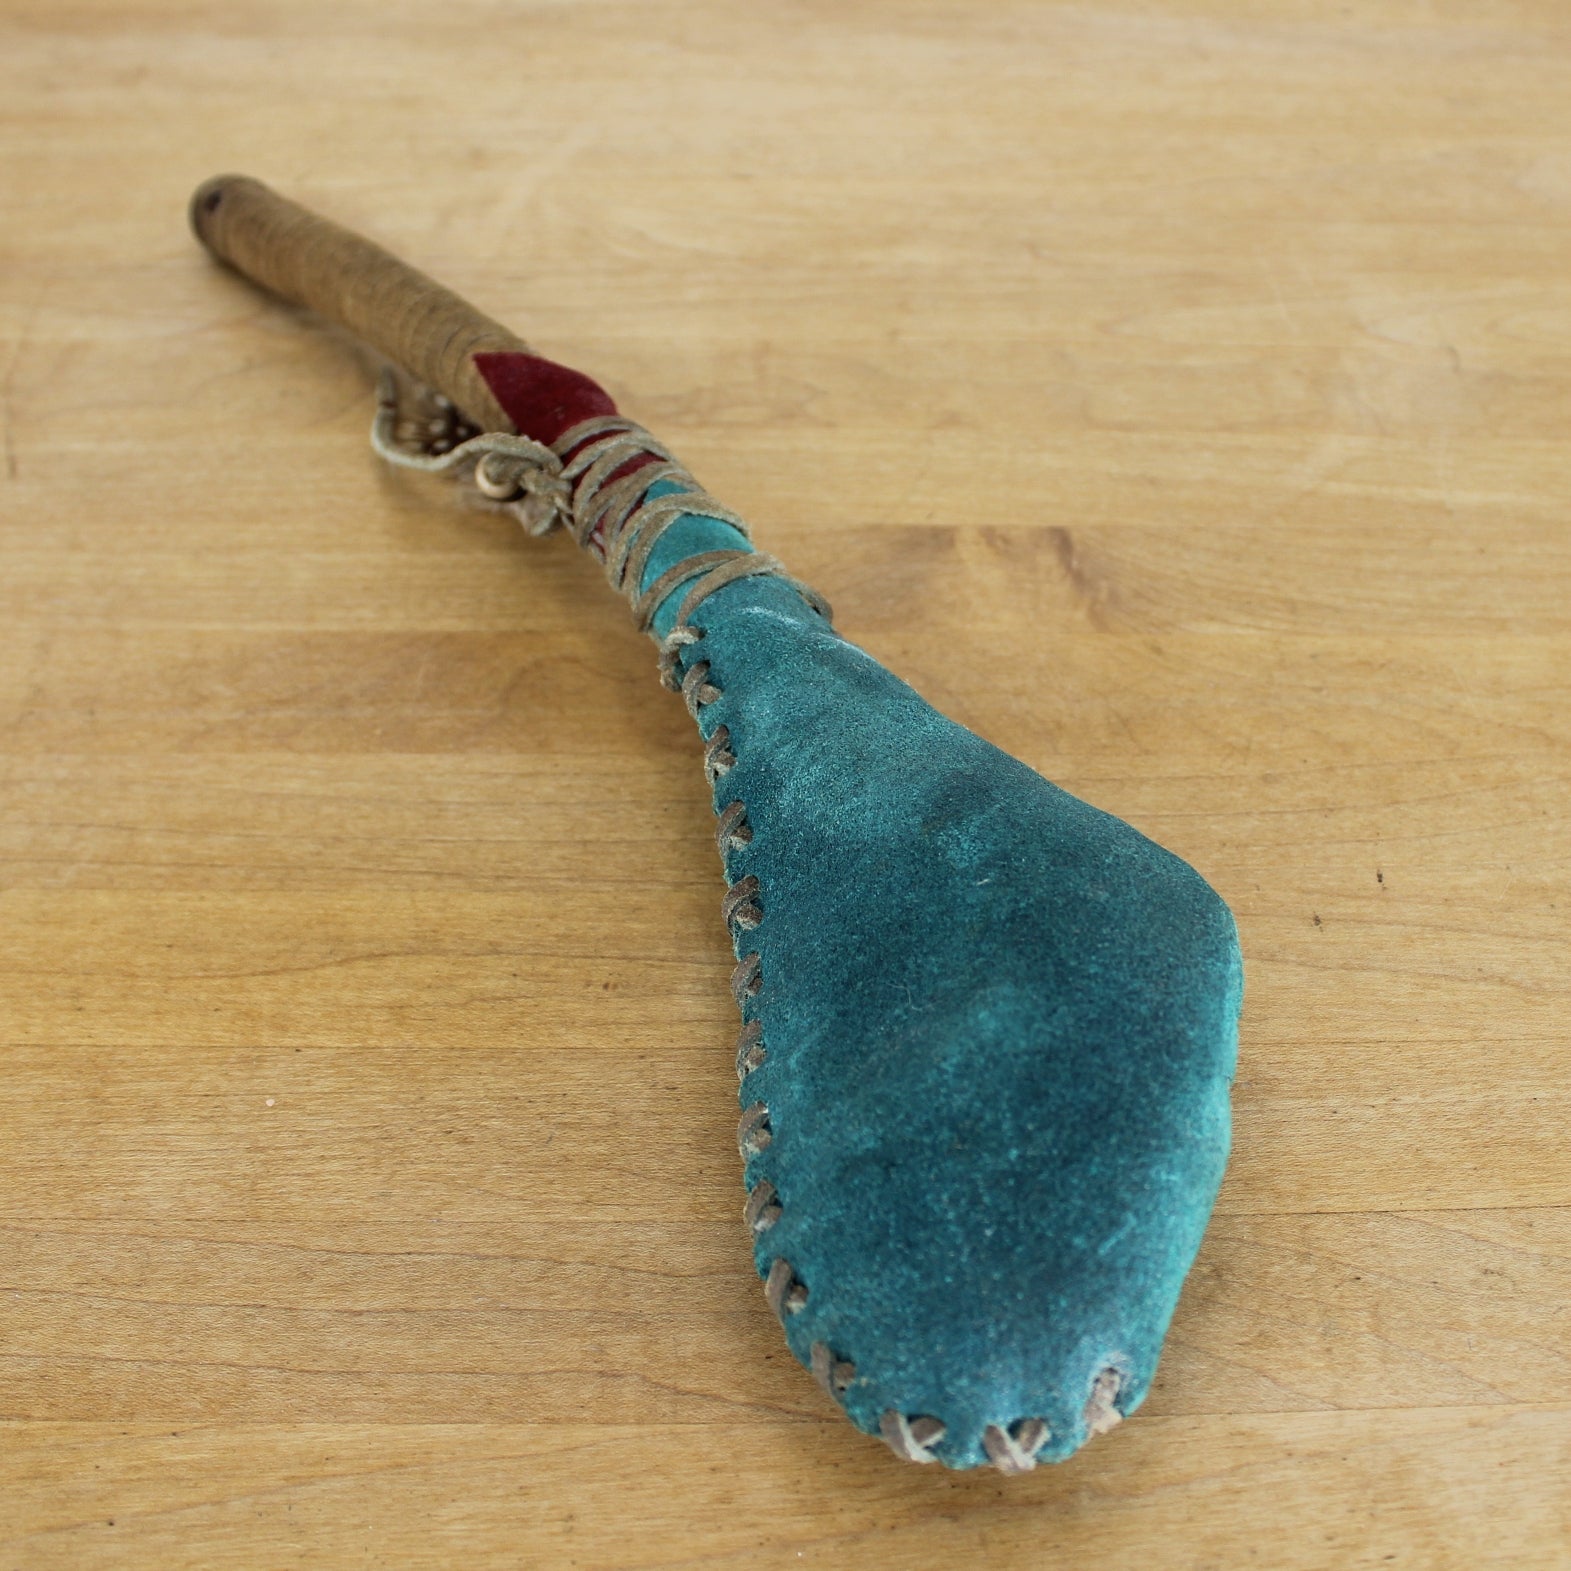 Native American Style Dance Rattler Shaker Turquoise Suede Feather Beads not new souvenir